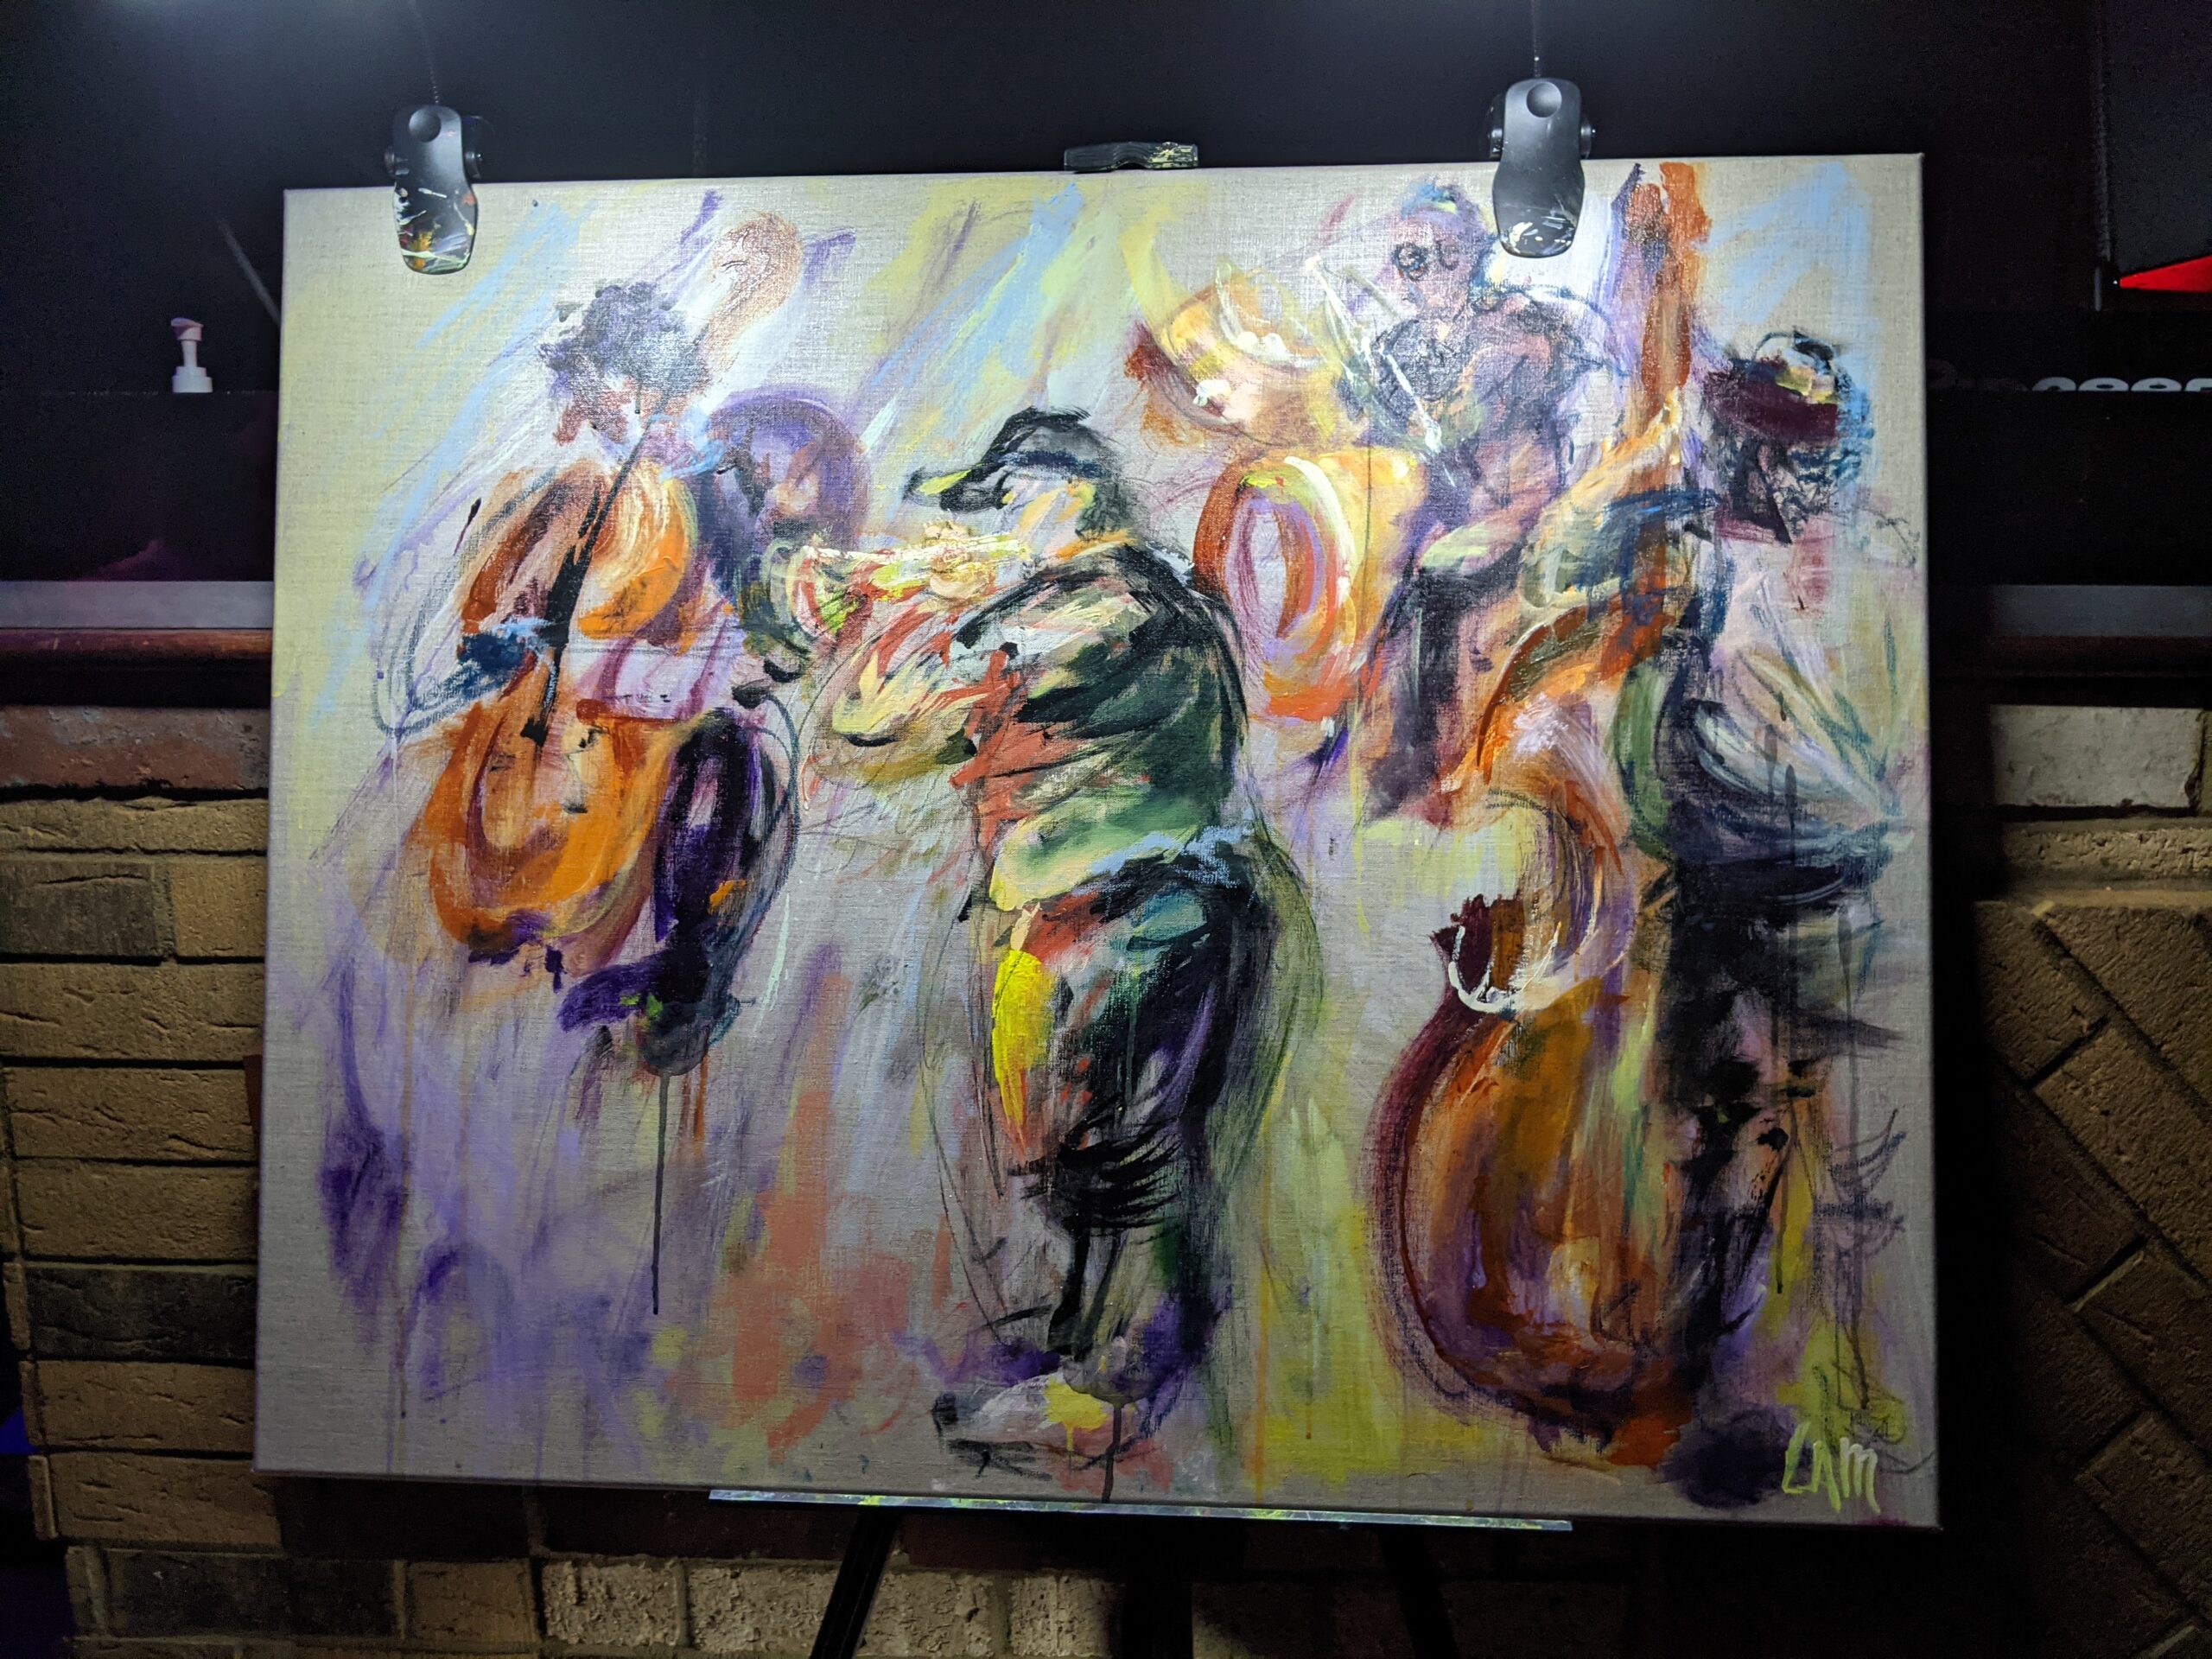 Live painting of Jaimie Branch at Jazz Cafe by Dora Lam